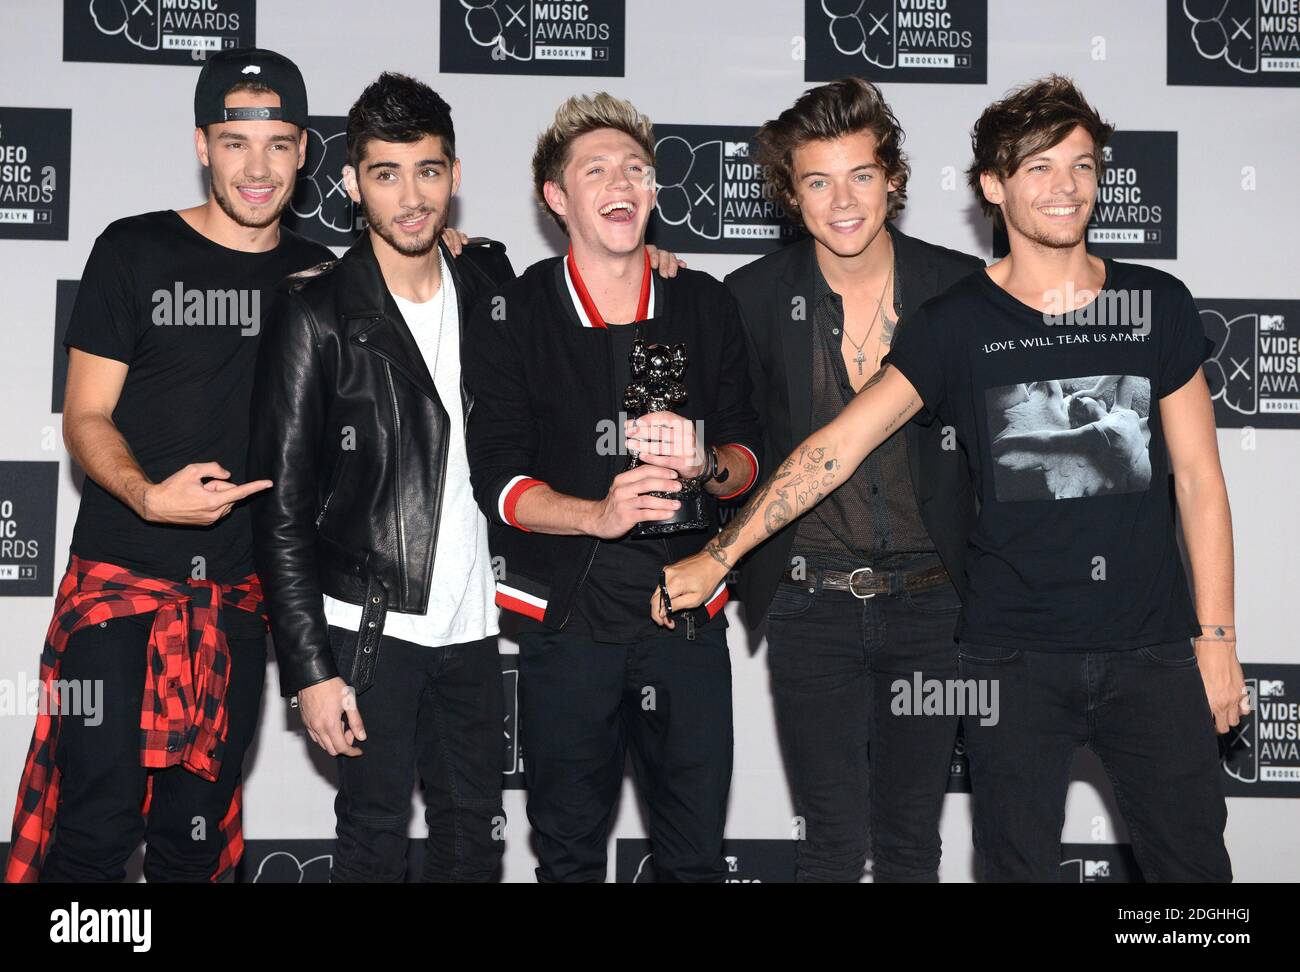 https://c8.alamy.com/comp/2DGHHGJ/musical-group-one-direction-band-members-niall-horan-zayn-malik-louis-tomlinson-liam-payne-harry-styles-backstage-in-the-awards-room-at-the-2013-mtv-video-music-awards-at-the-barclays-center-brooklyn-ny-on-august-25-2013-2DGHHGJ.jpg